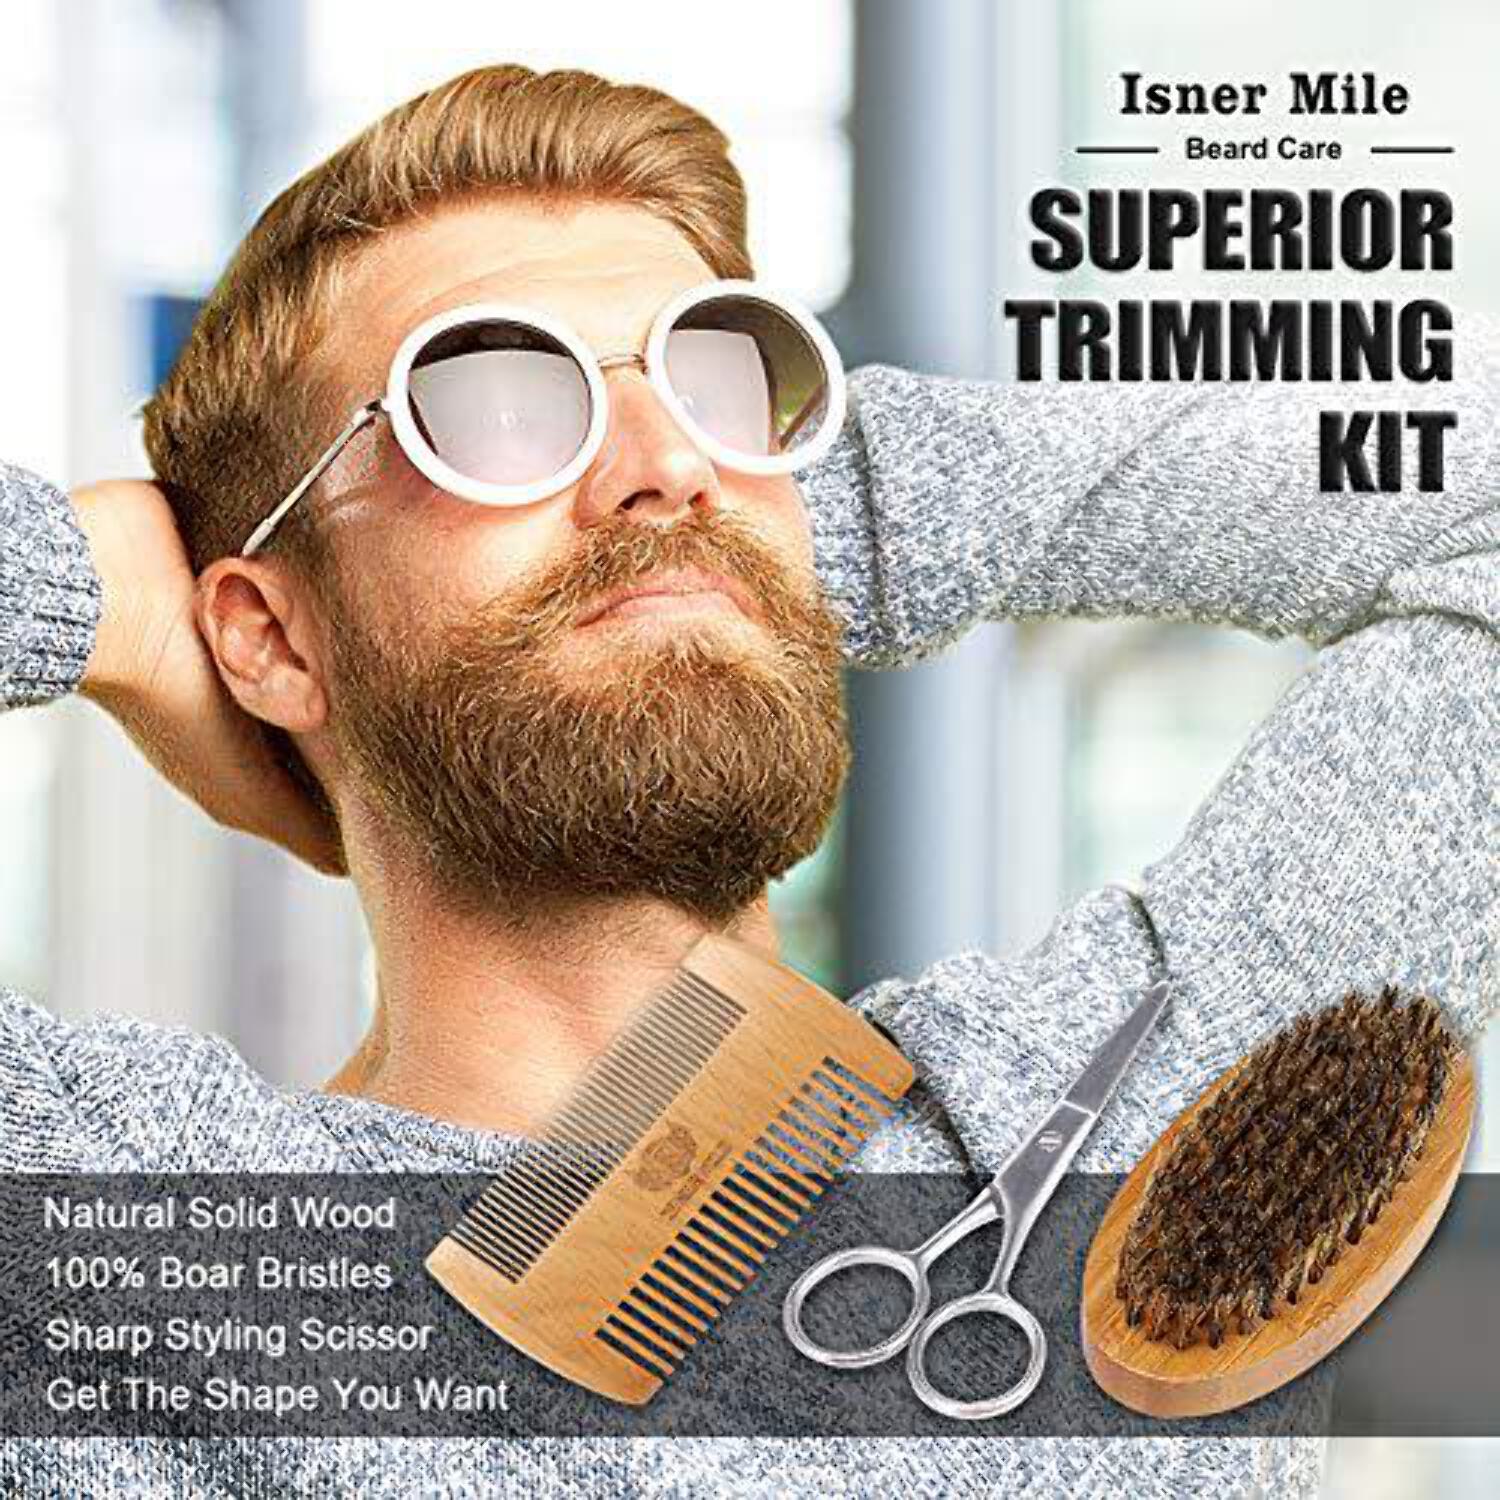 Isner Mile Beard Kit for Men, Grooming  Trimming Tool Complete Set with Shampoo Wash, Beard Care Oil, Balm, Brush, Comb, Scissors  Storage Bag, Perfect Gifts for Him Man Dad Father Boyfriend - image 3 of 7